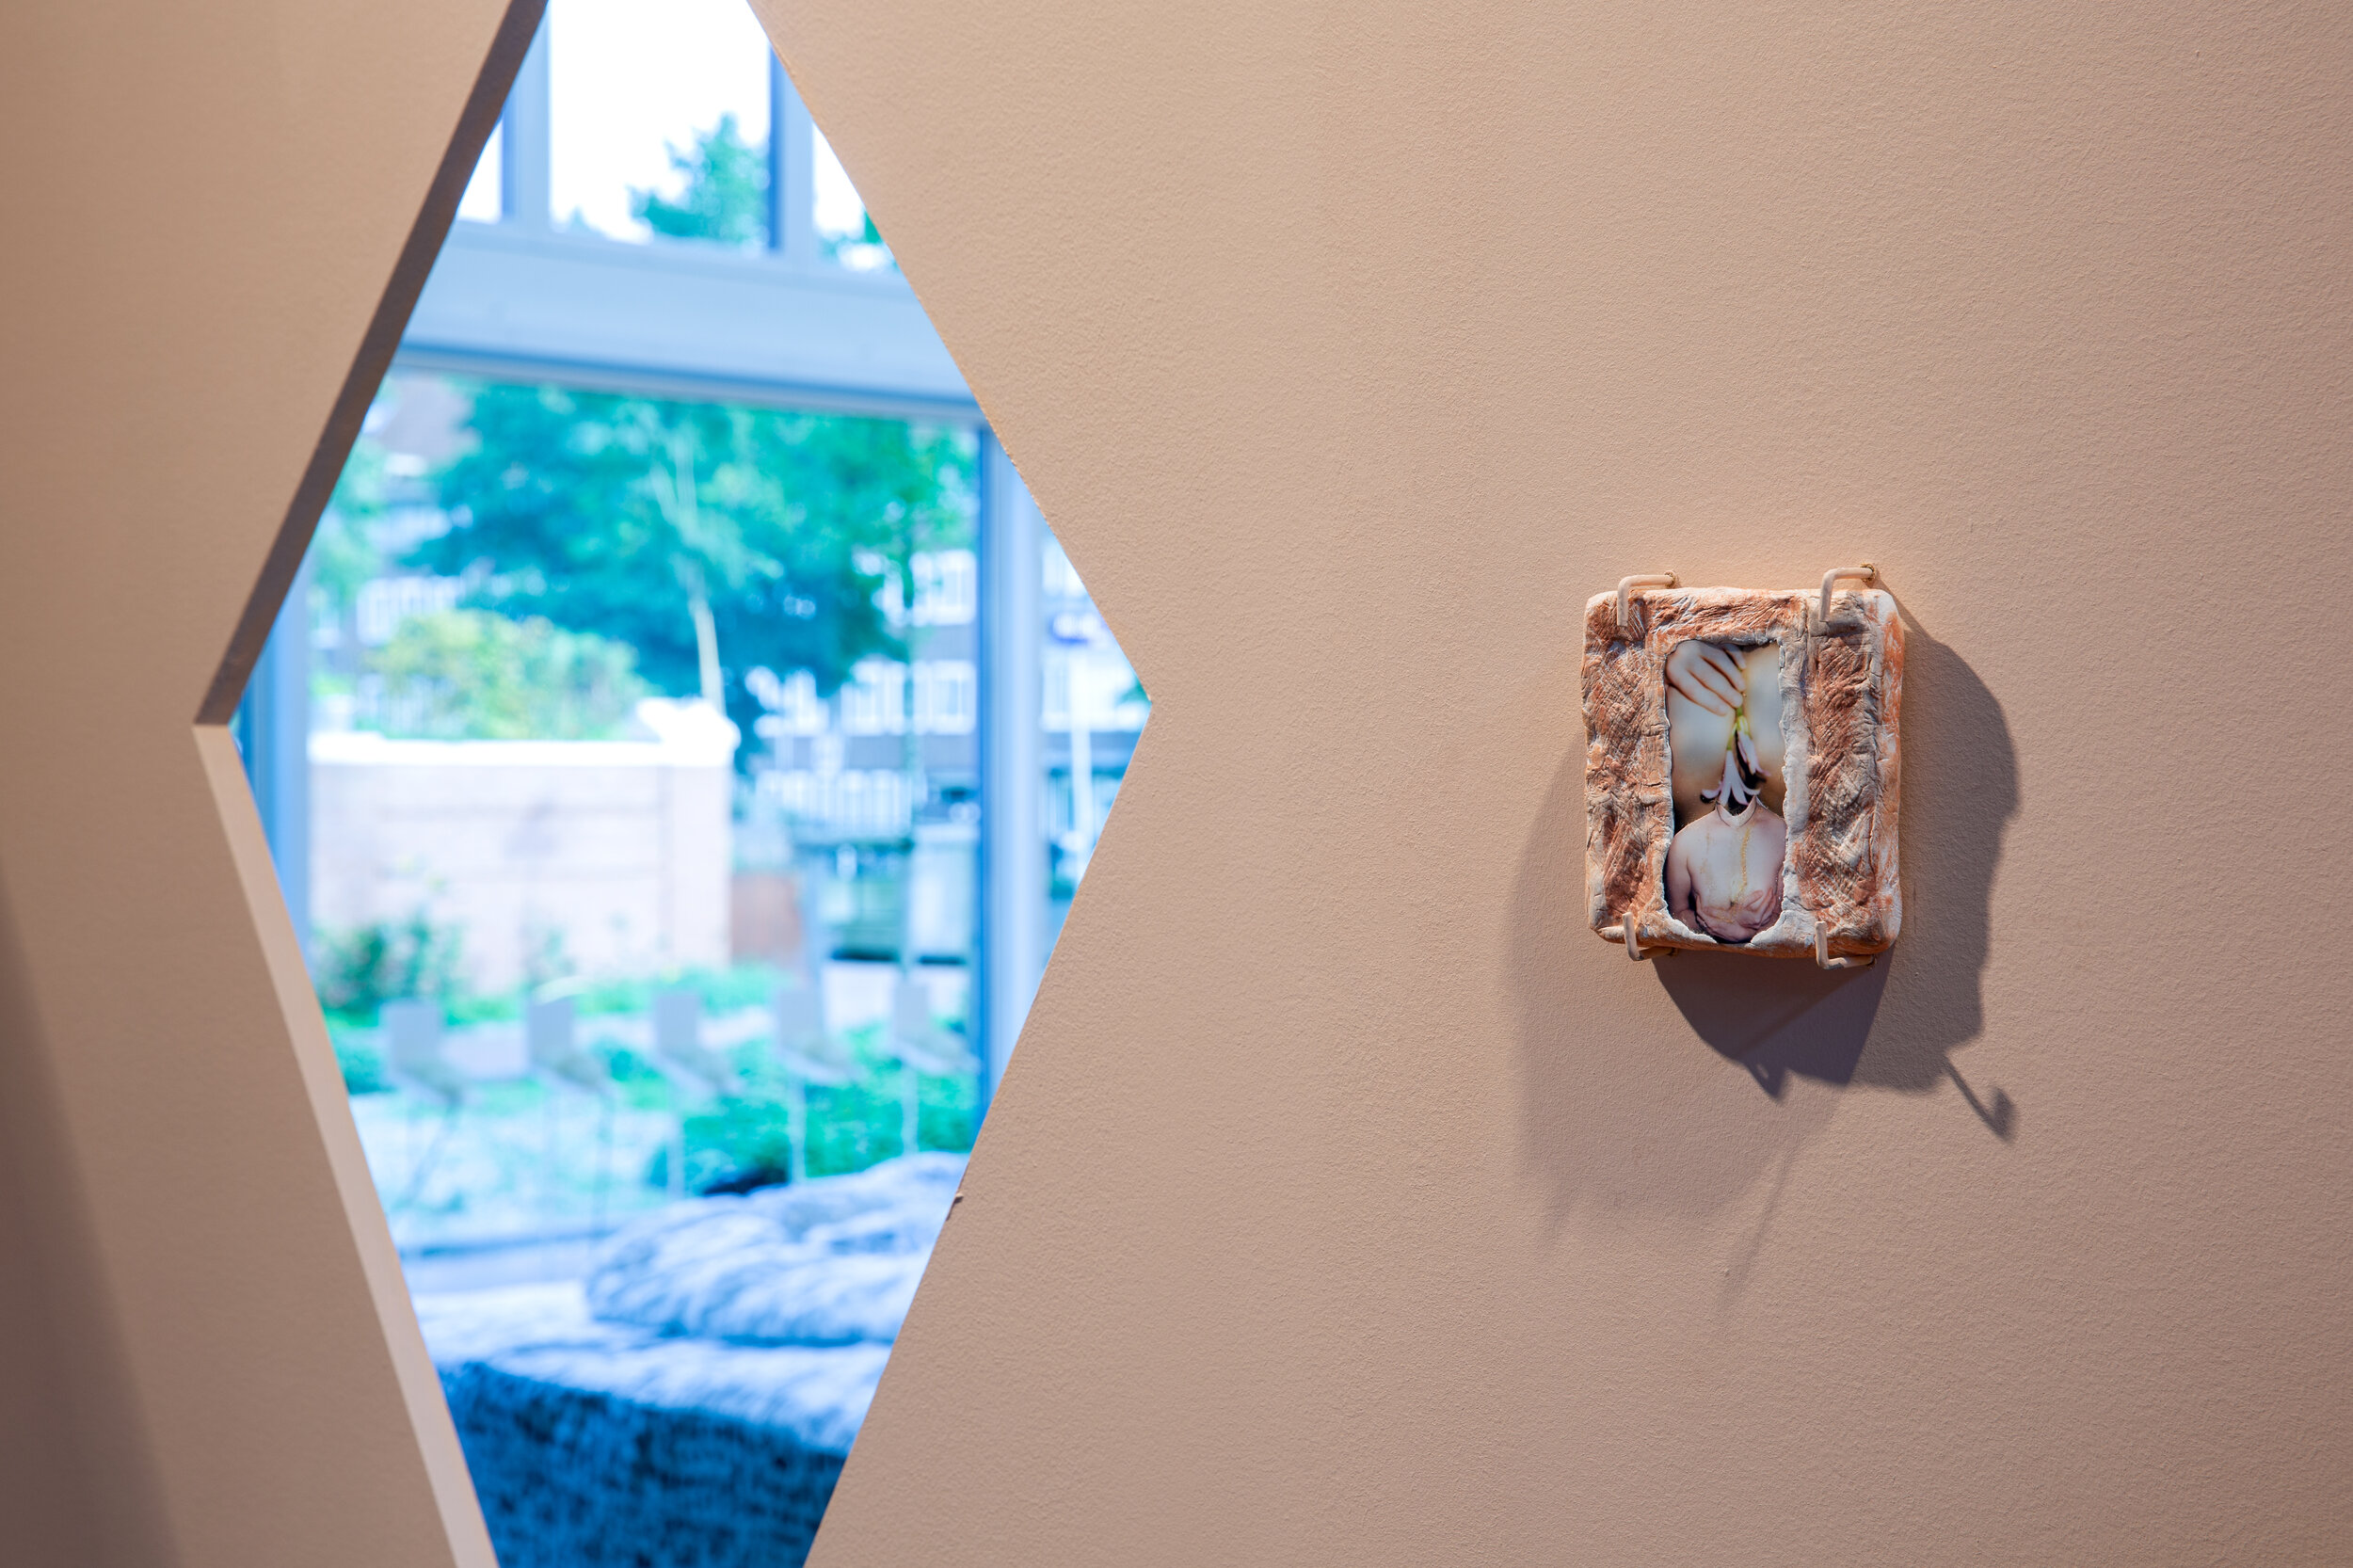  Installation photo from the exhibition Elsewheres Within Here curated by Jo-Lene Ong at Framer Framed, Amsterdam [2019]. © Maarten Van Haaff, Framer Framed. 